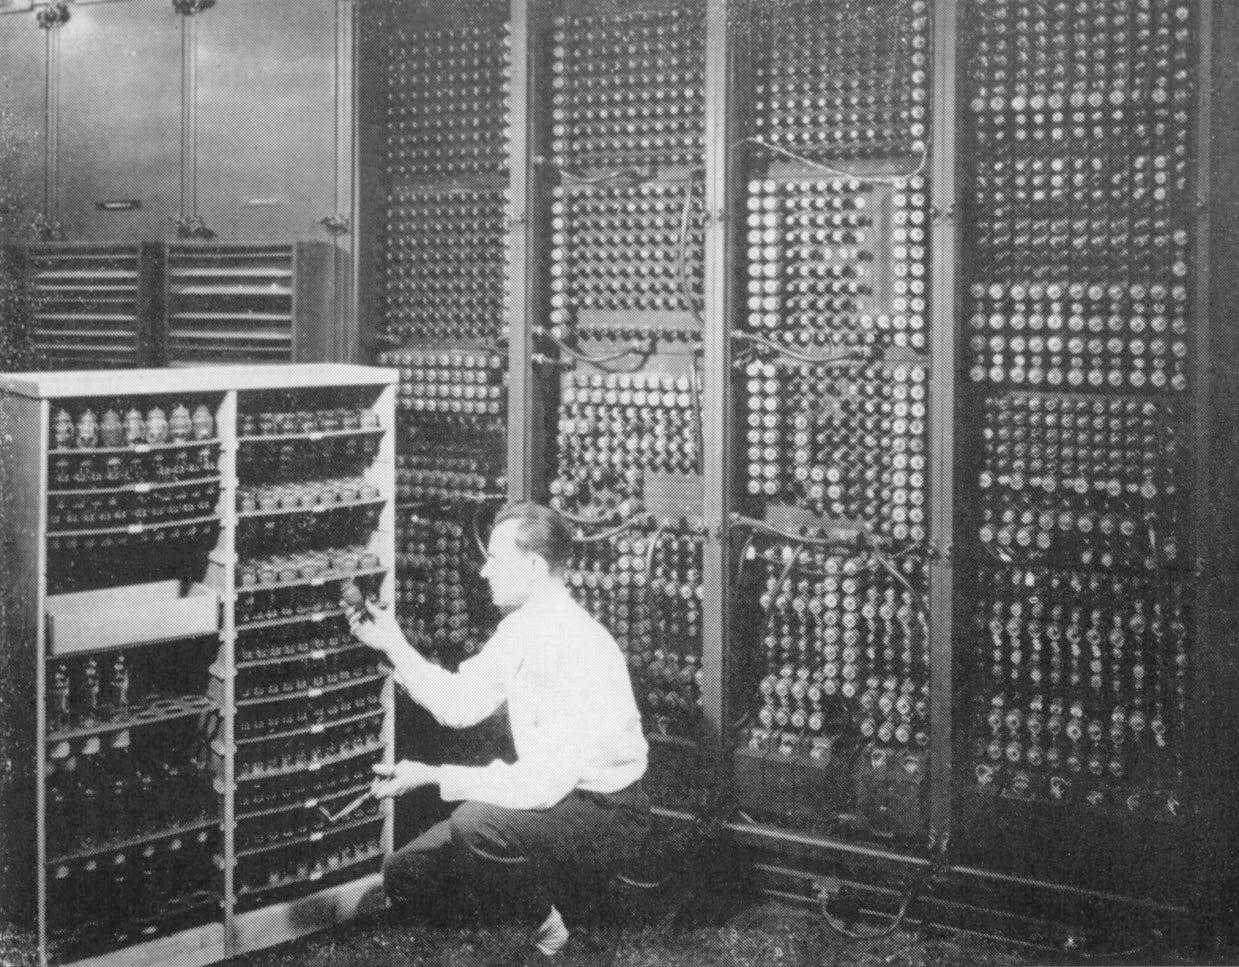 ENIAC, the first computer.